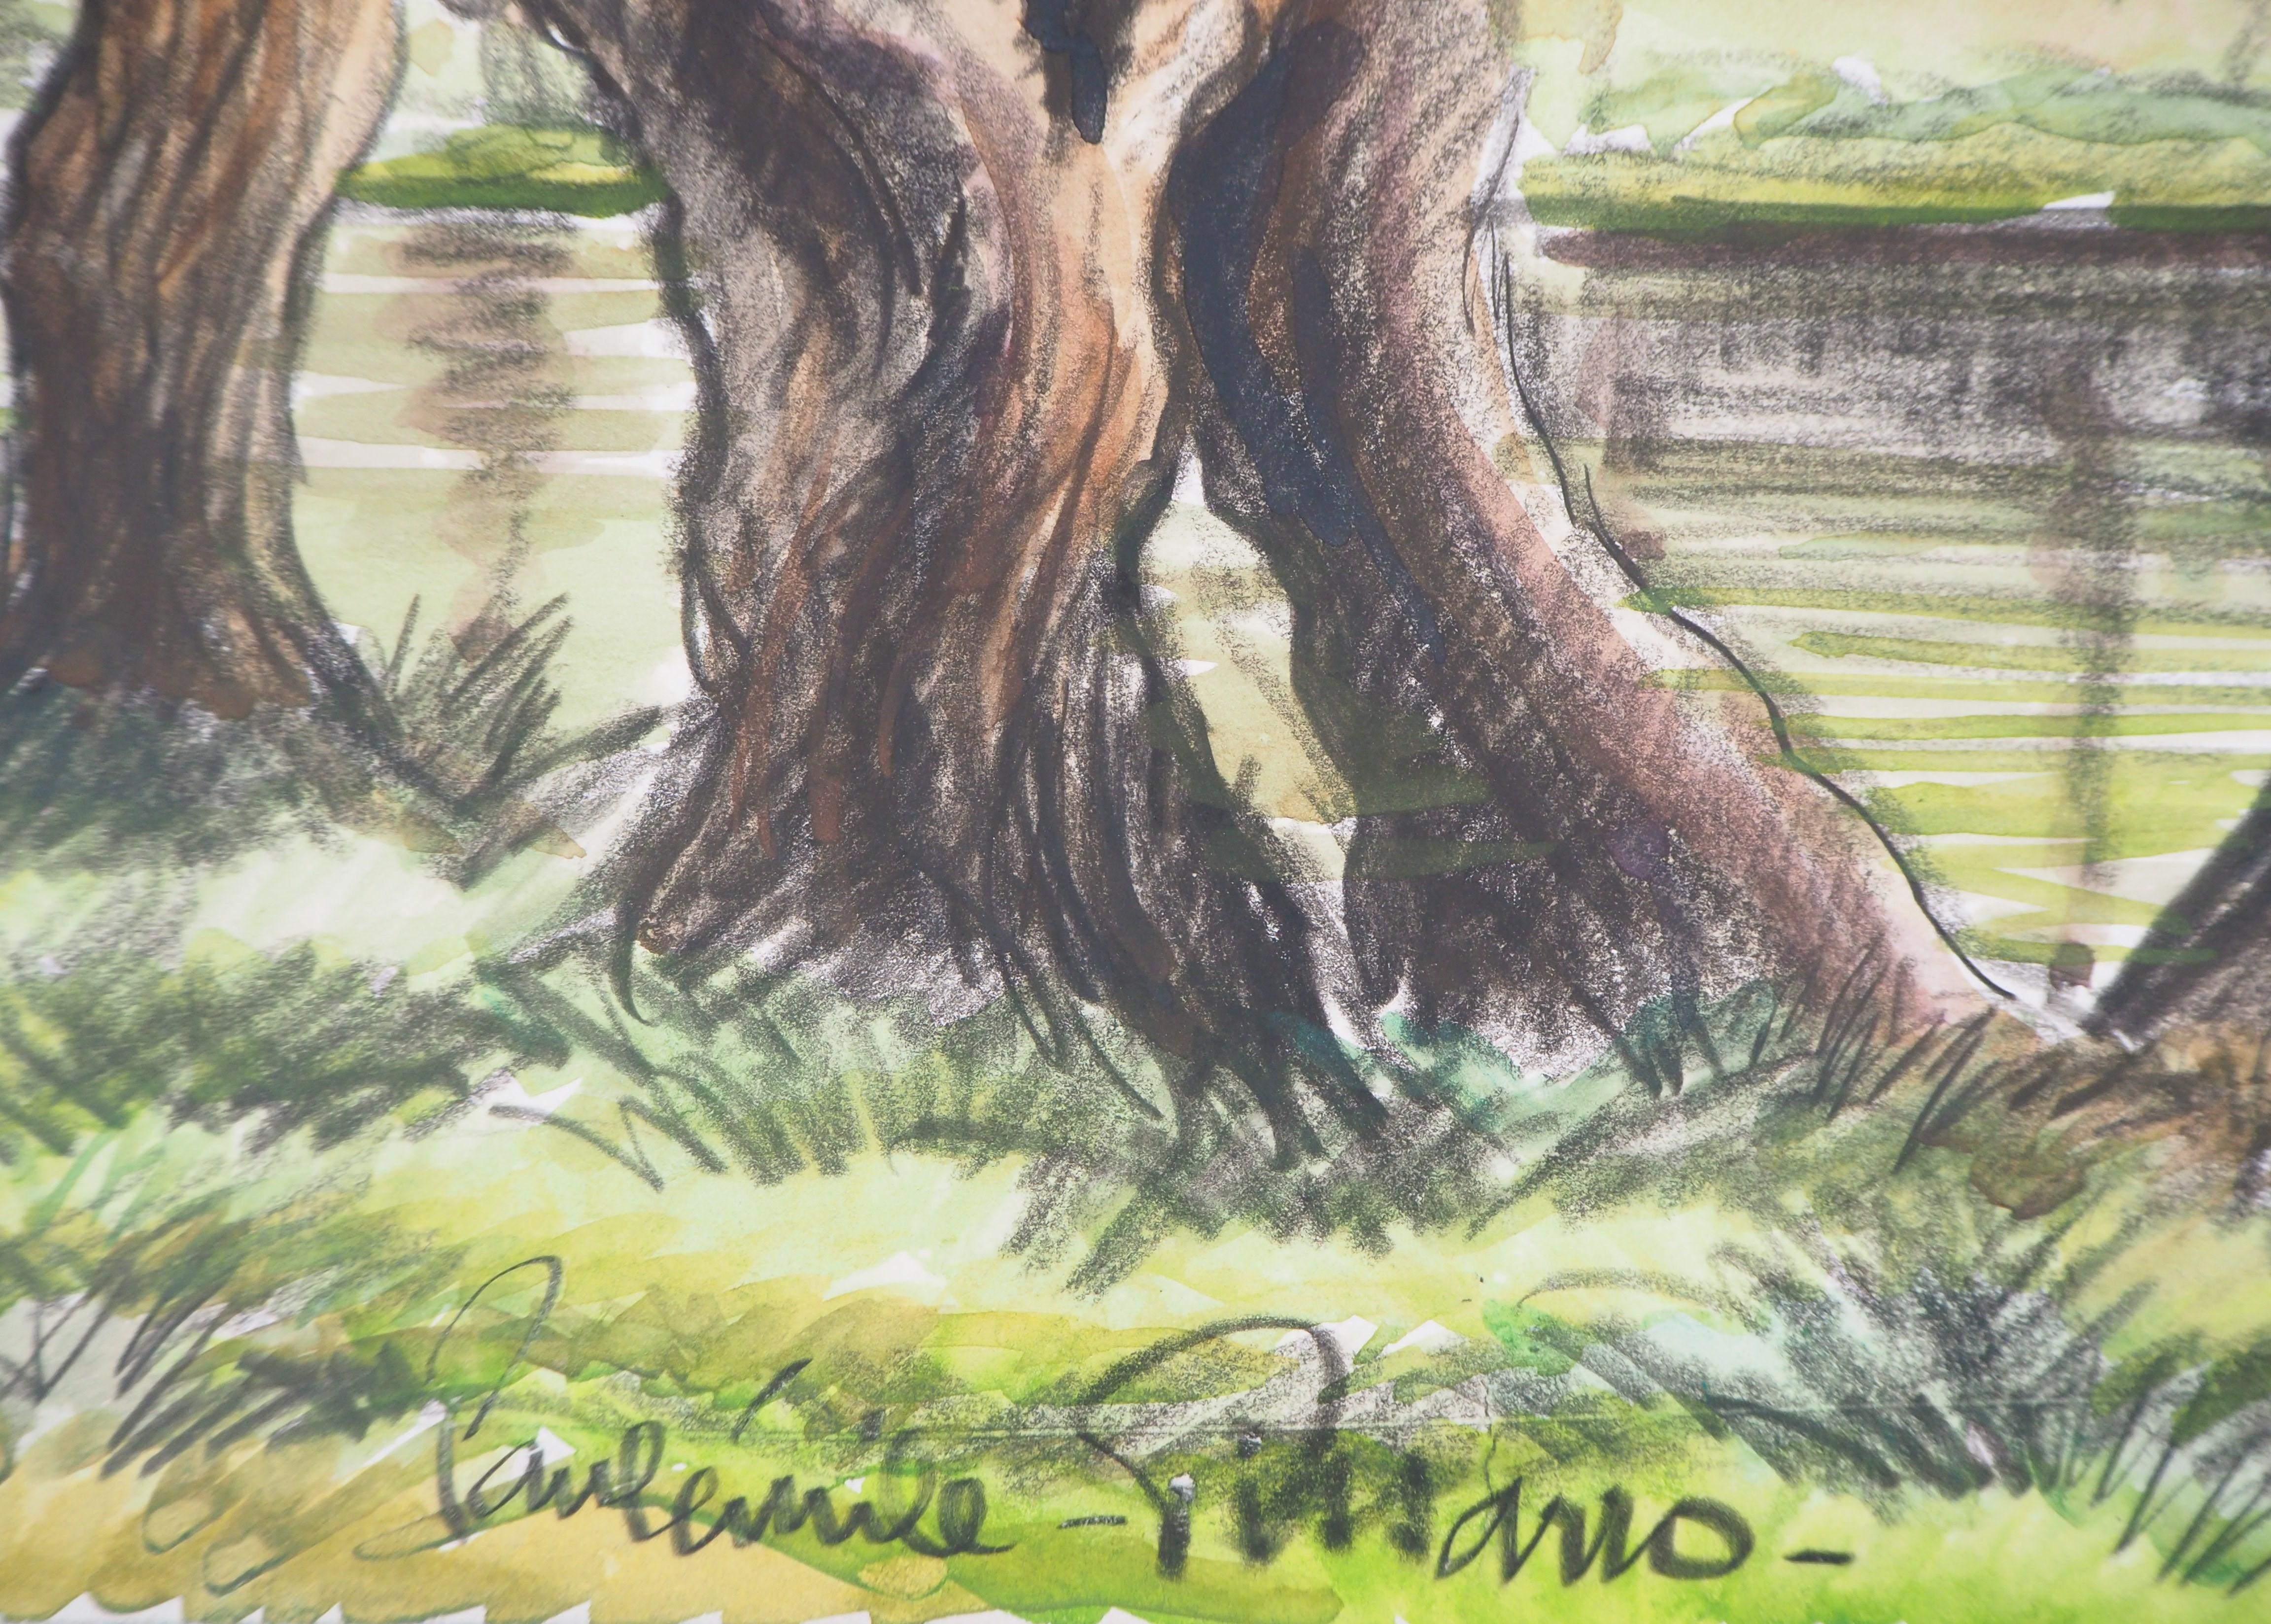 Old Trees near a Canal - Original watercolor painting - Signed - Art by Paul Emile Pissarro